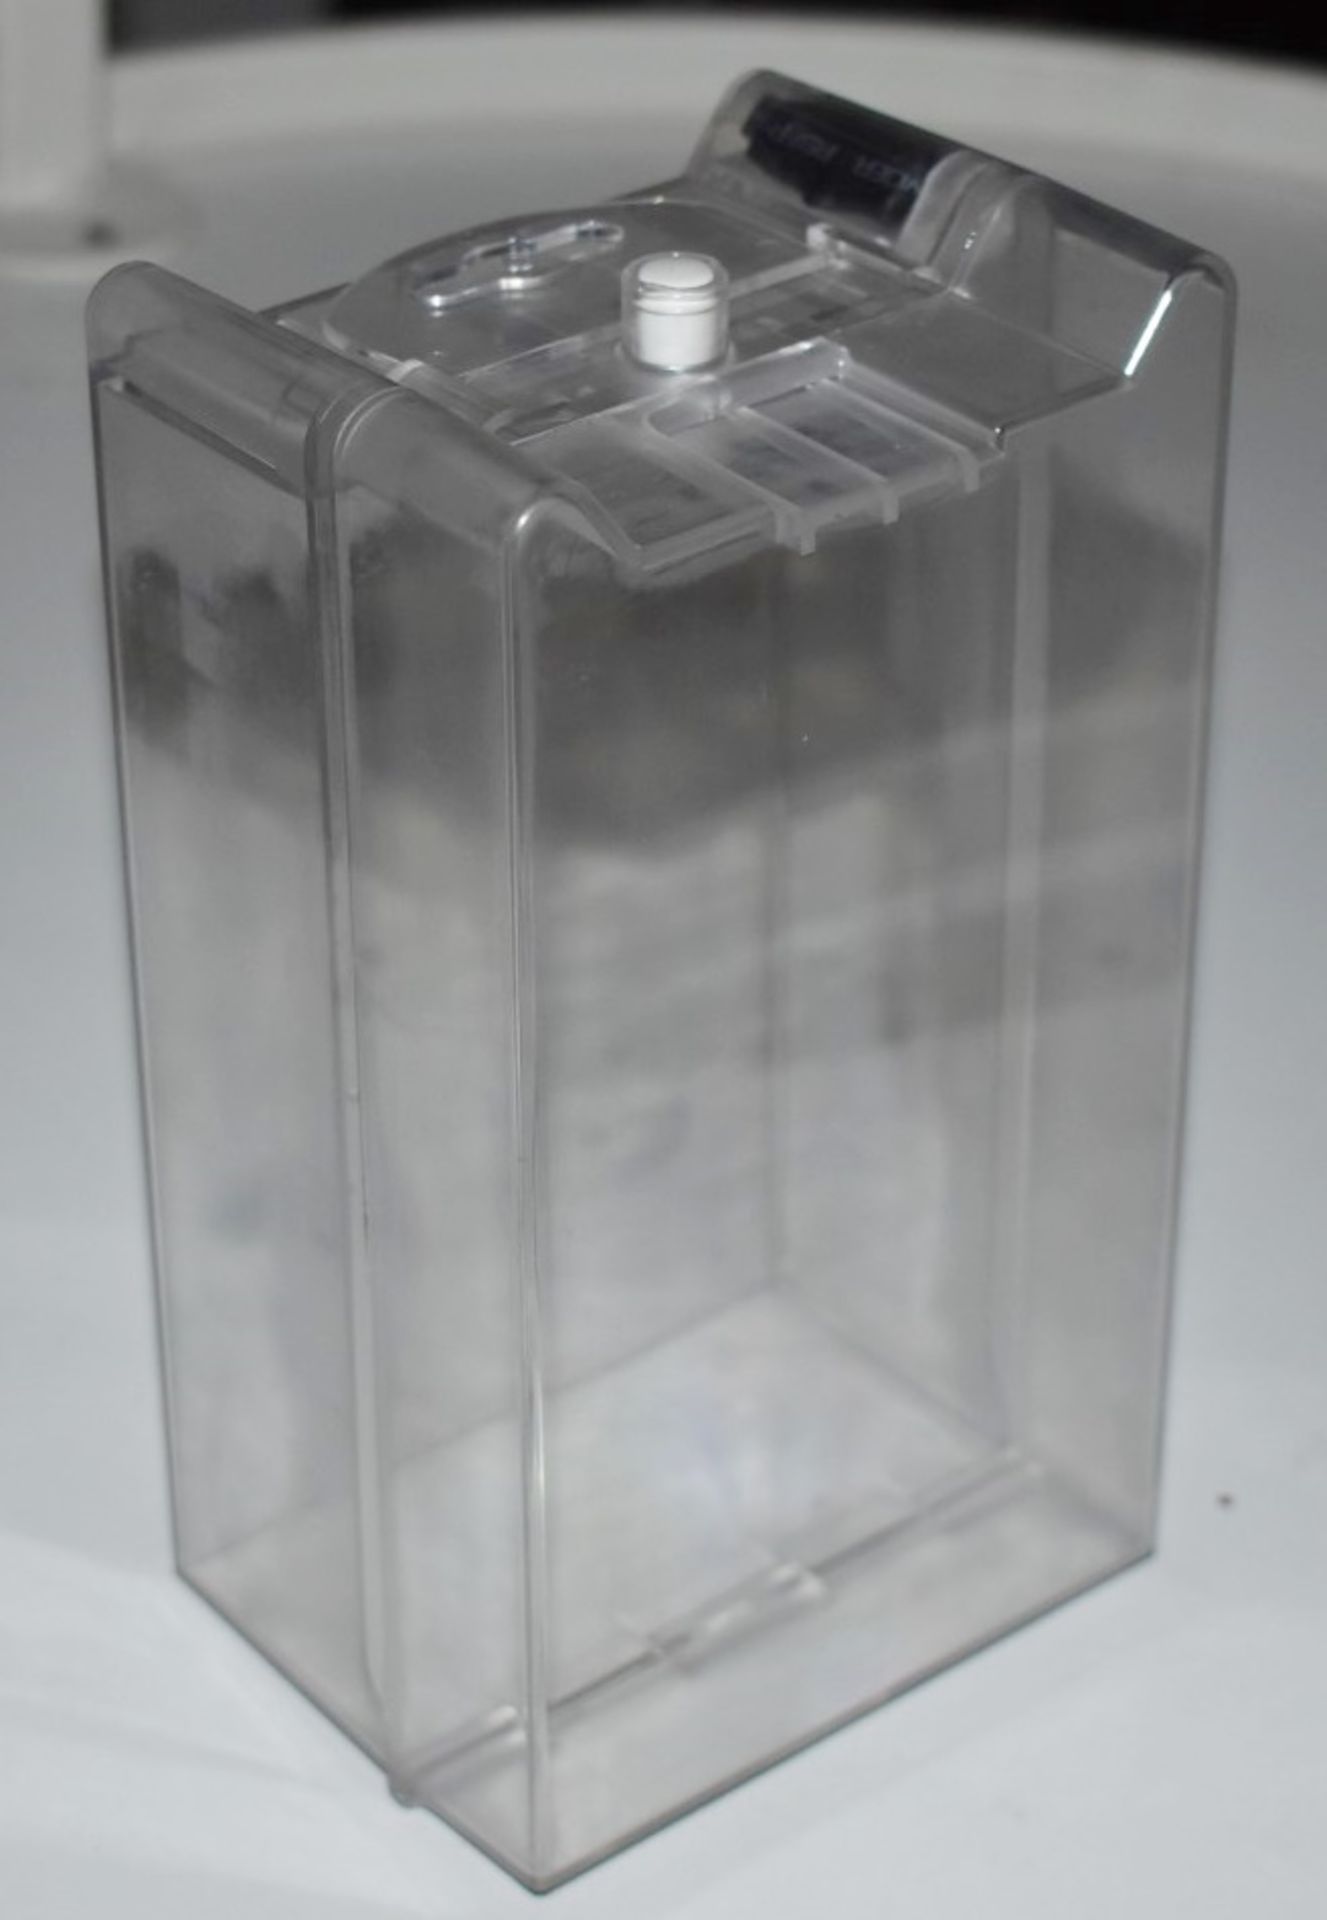 40 x Catalyst Clear Acrylic Retail Security Safer Cases With RF Tags and Hanging Tags - Brand New - Image 7 of 8